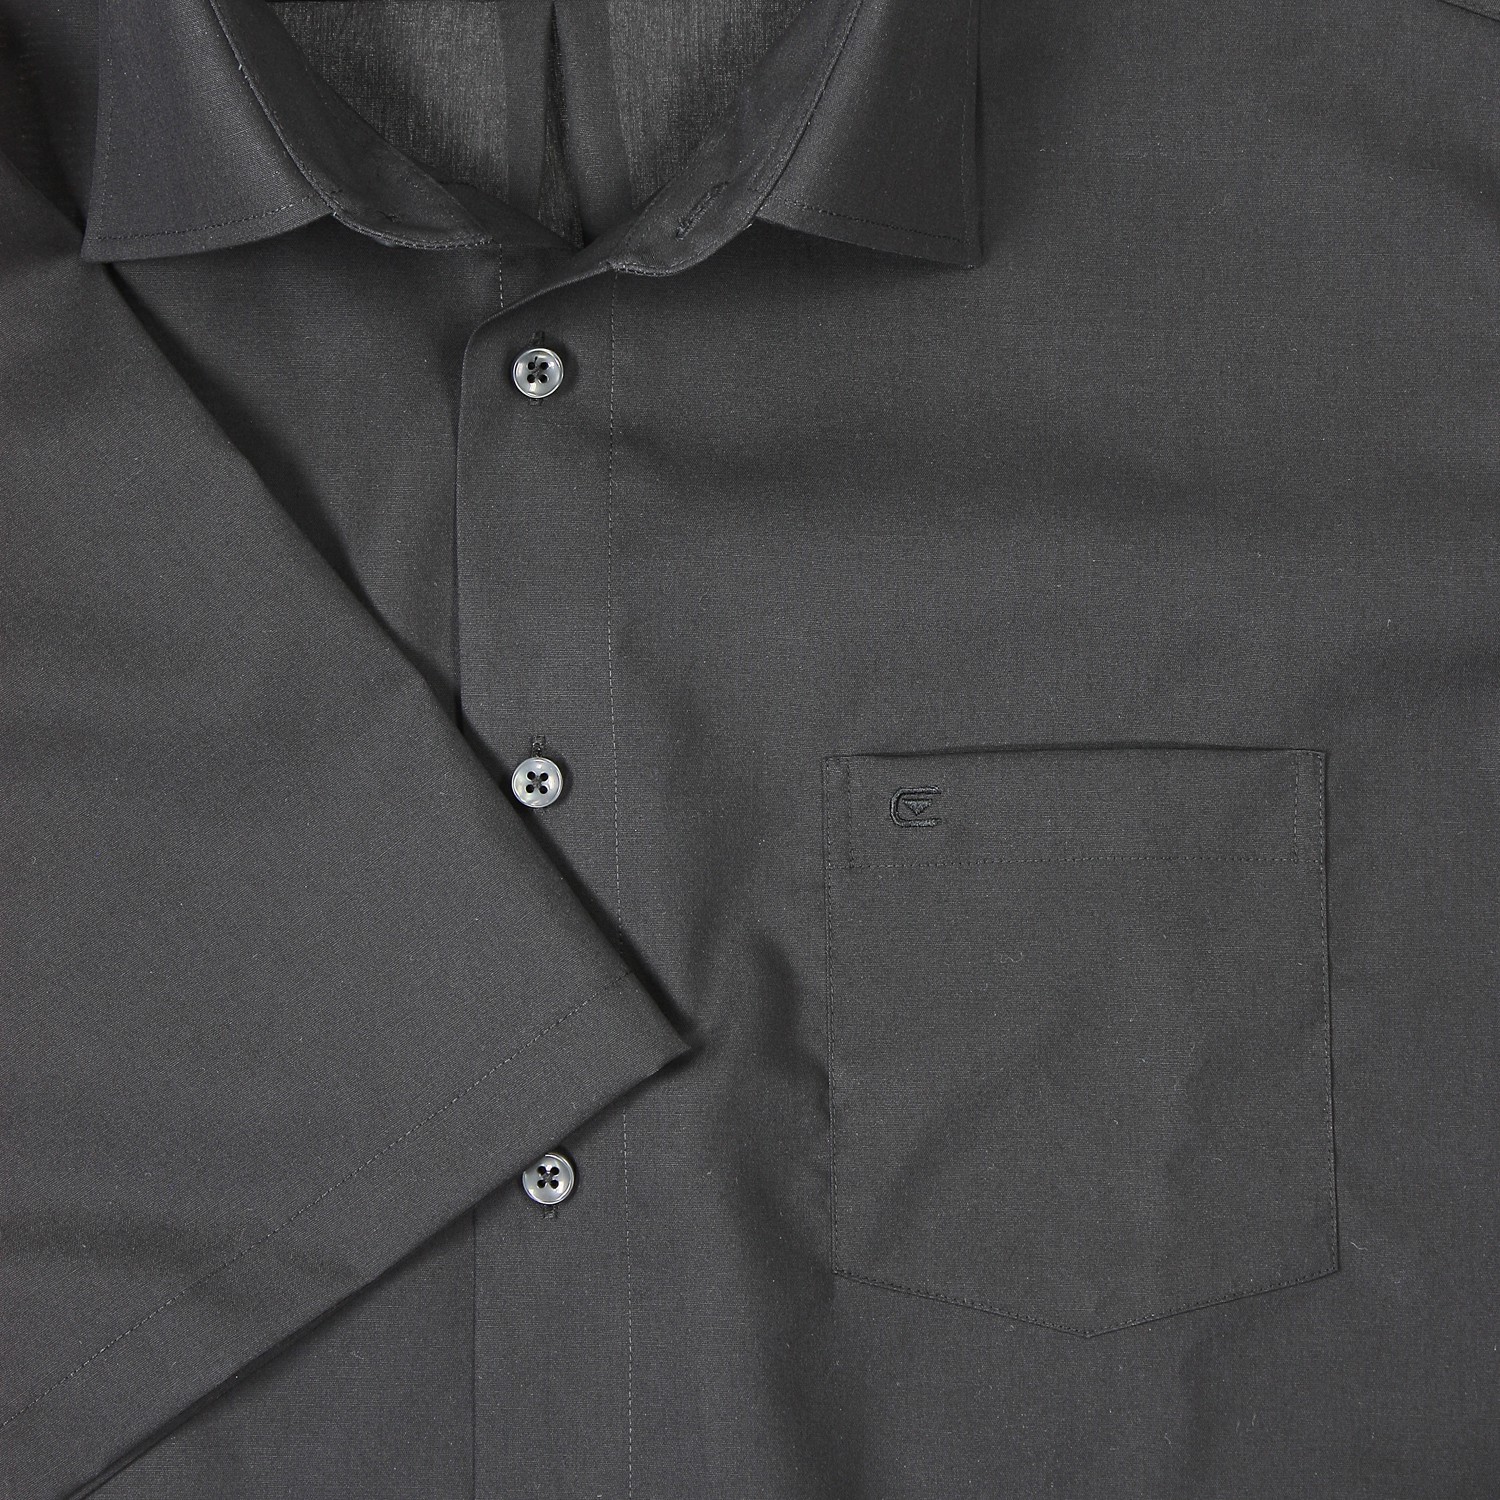 Short sleeve shirt in anthracite by Casamoda up tp oversize 7XL